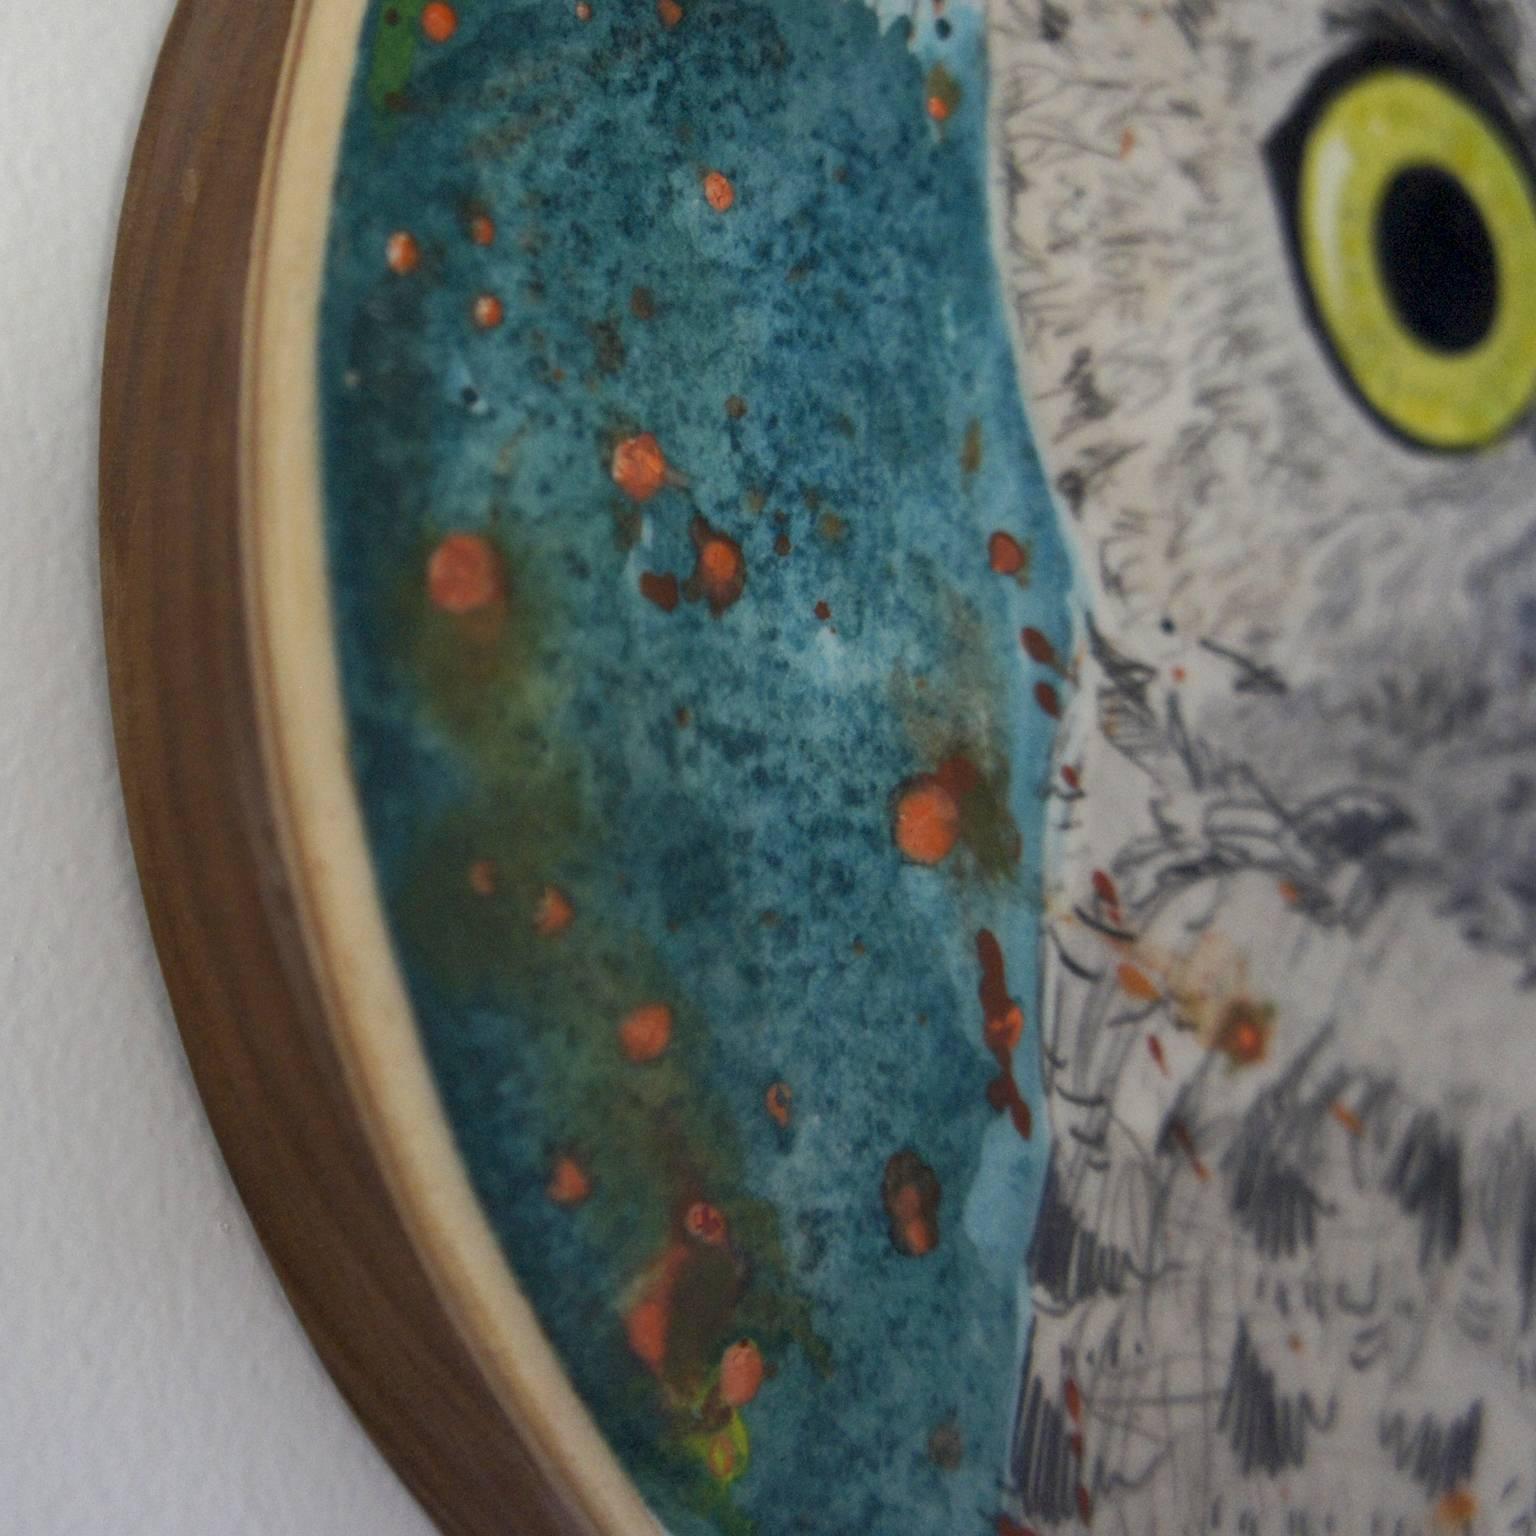 Gin Stone's “Walter” is an 8 x 8 x 1 inch watercolor, graphite and wax mixed media painting on paper mounted on a round birch wood panel and is part of a series of nature studies. The great horned owl has highly detailed eyes and feathers and is